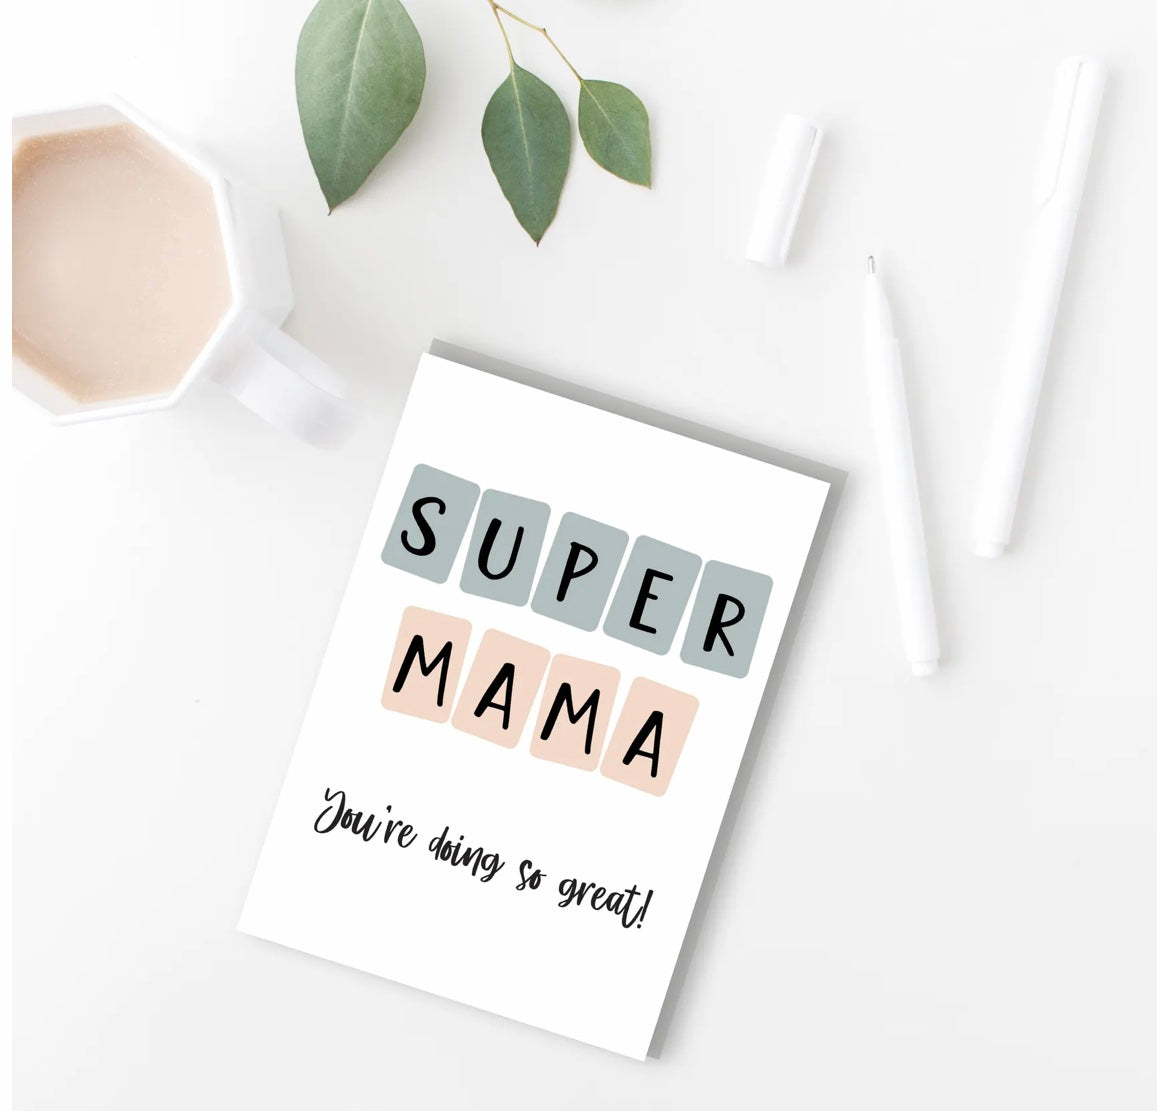 Super Mama - you are doing so great!